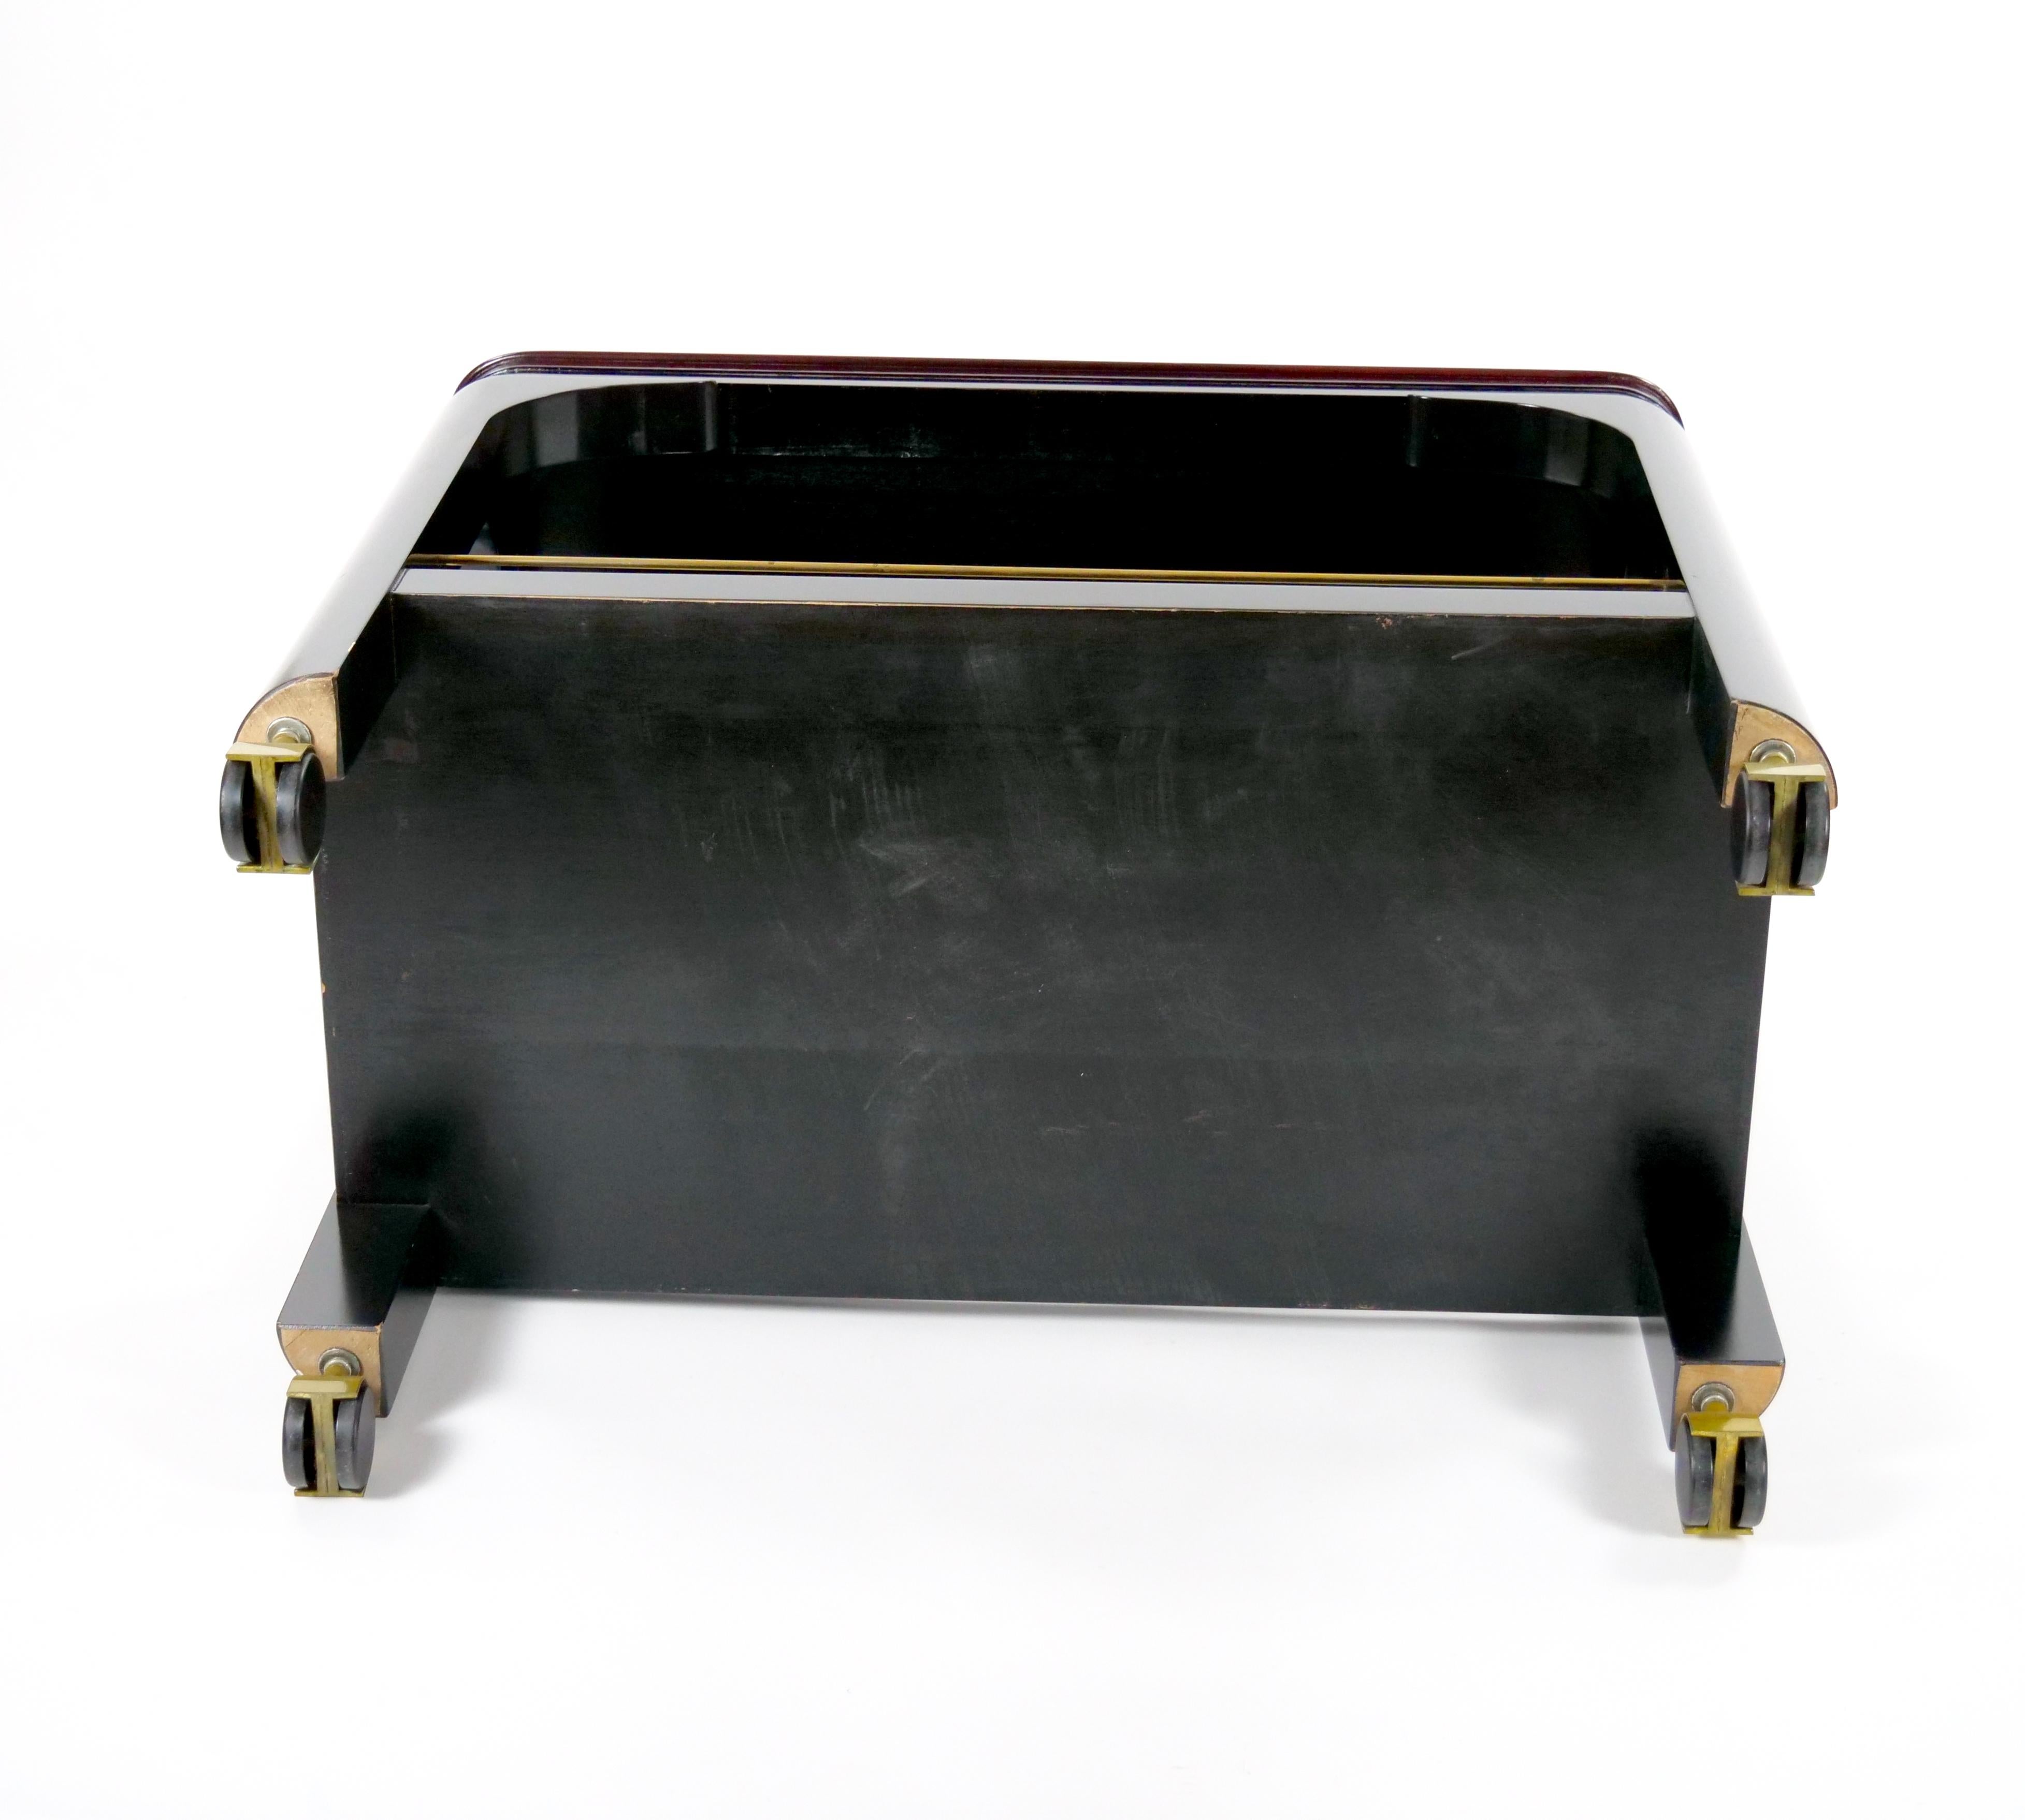  Paul Jones Black Brown lacquered Rolling Serving /Bar Cart, 1960s For Sale 3